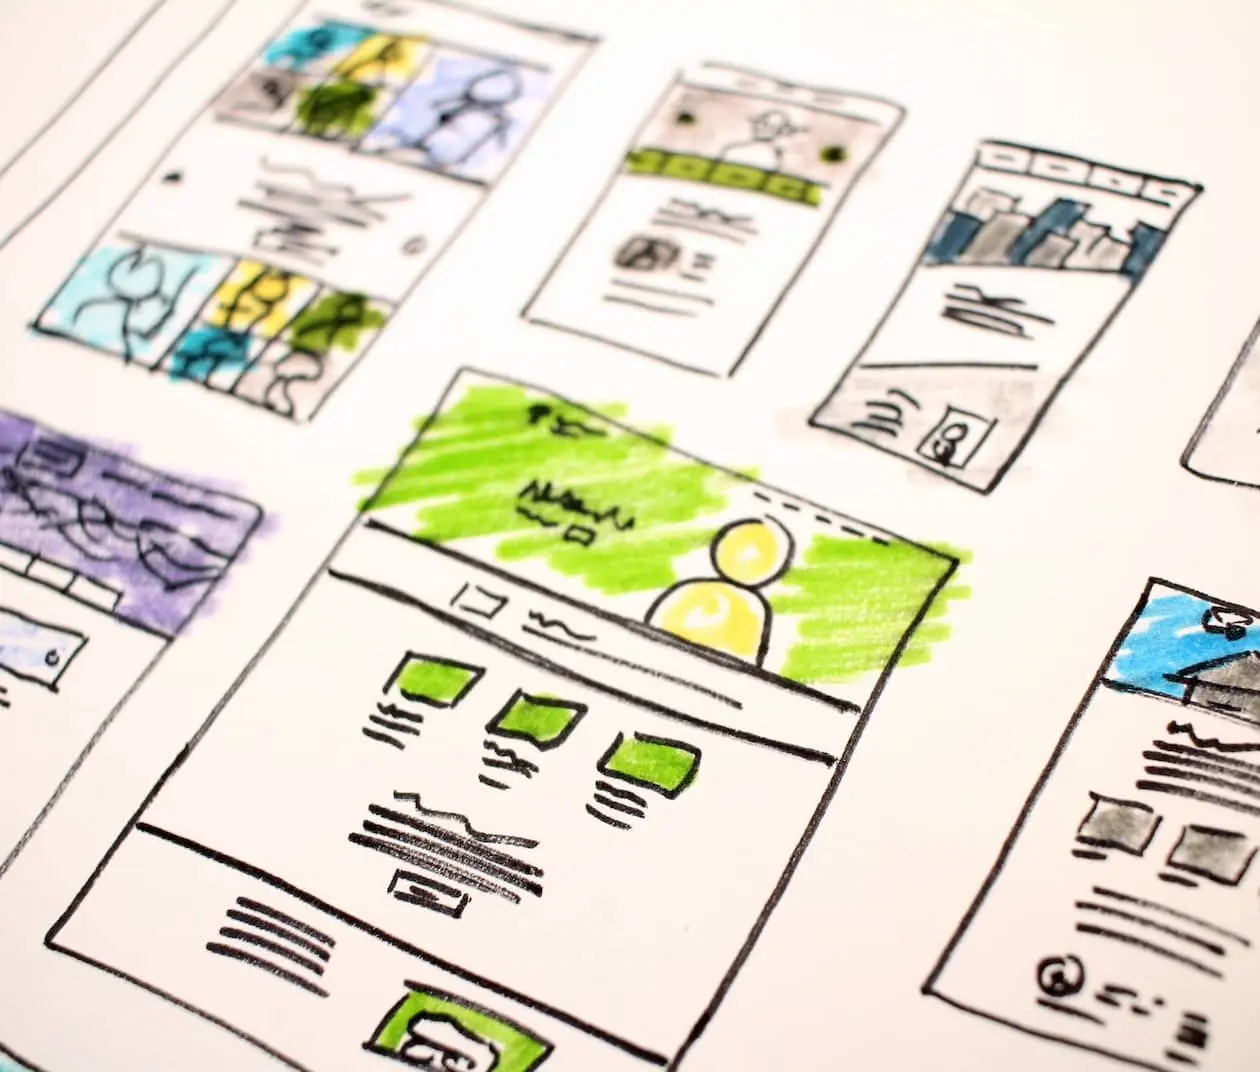 Storyboard sketches for a website interface design, with black and white drawings and yellow and green highlights.